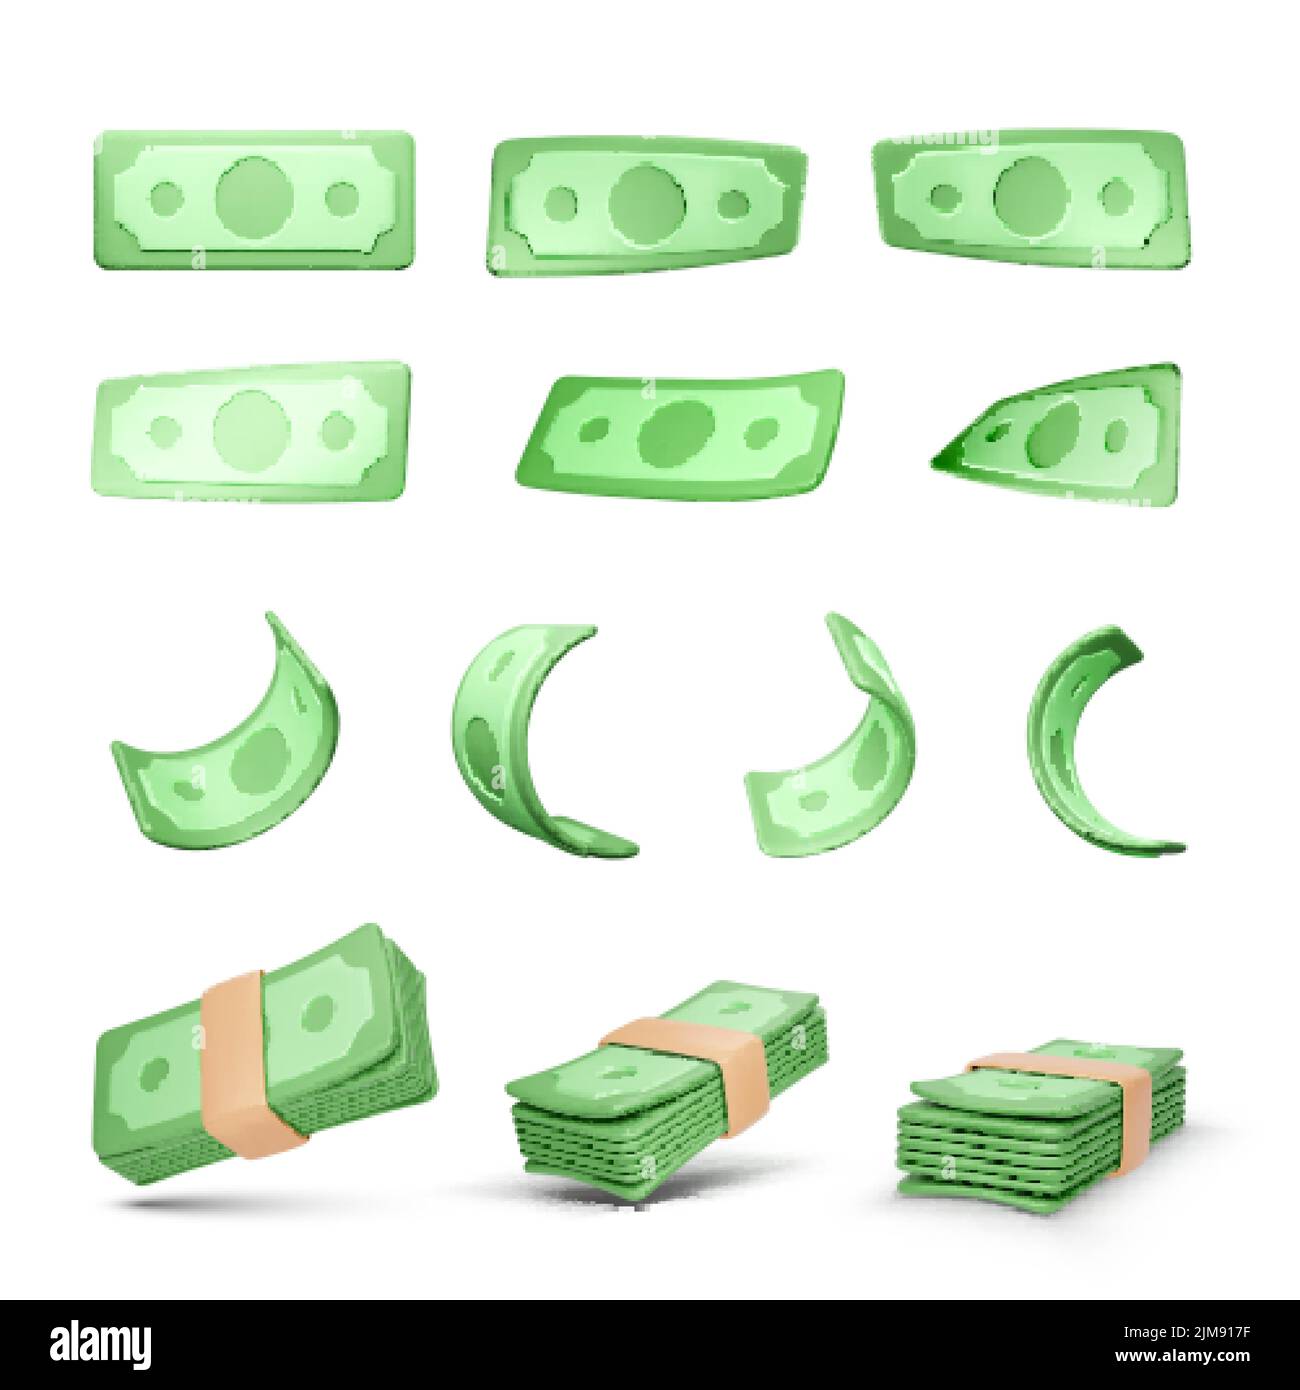 Realistic money set. Collection of 3D green dollars isolated on white background. Twisted paper bills and stack of currency banknotes. Business and fi Stock Vector